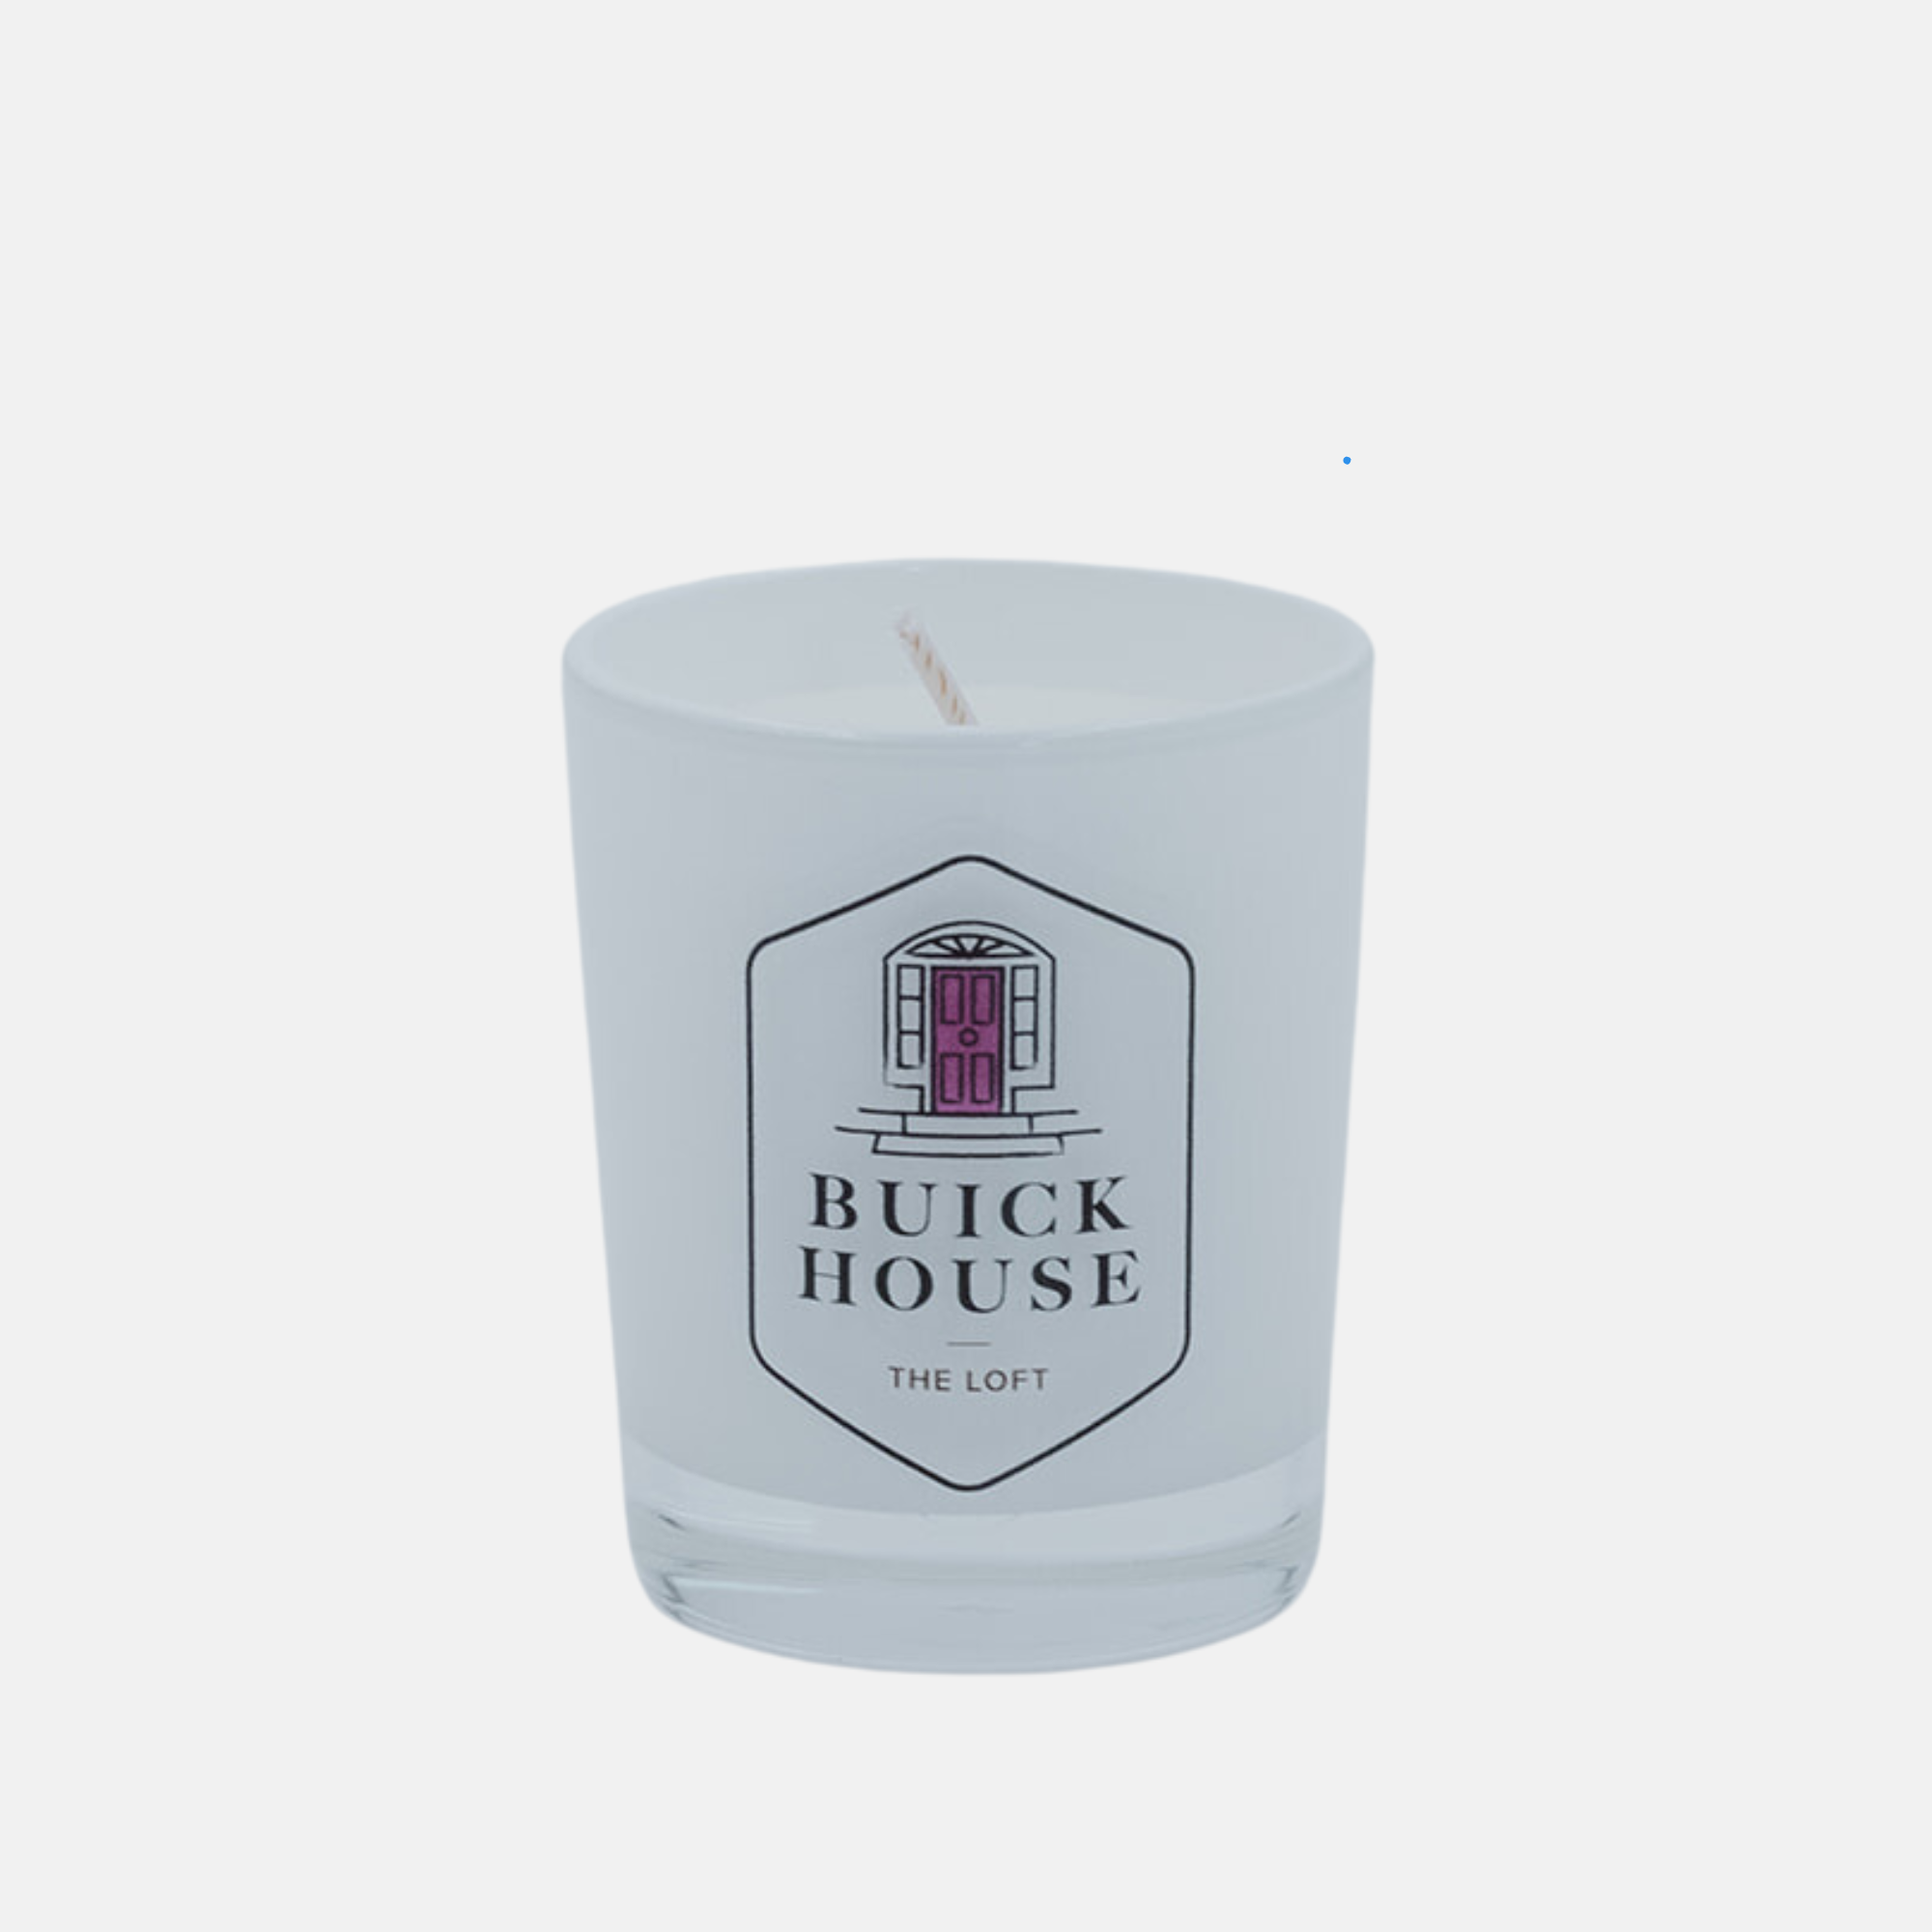 'The Loft' Scented Candle